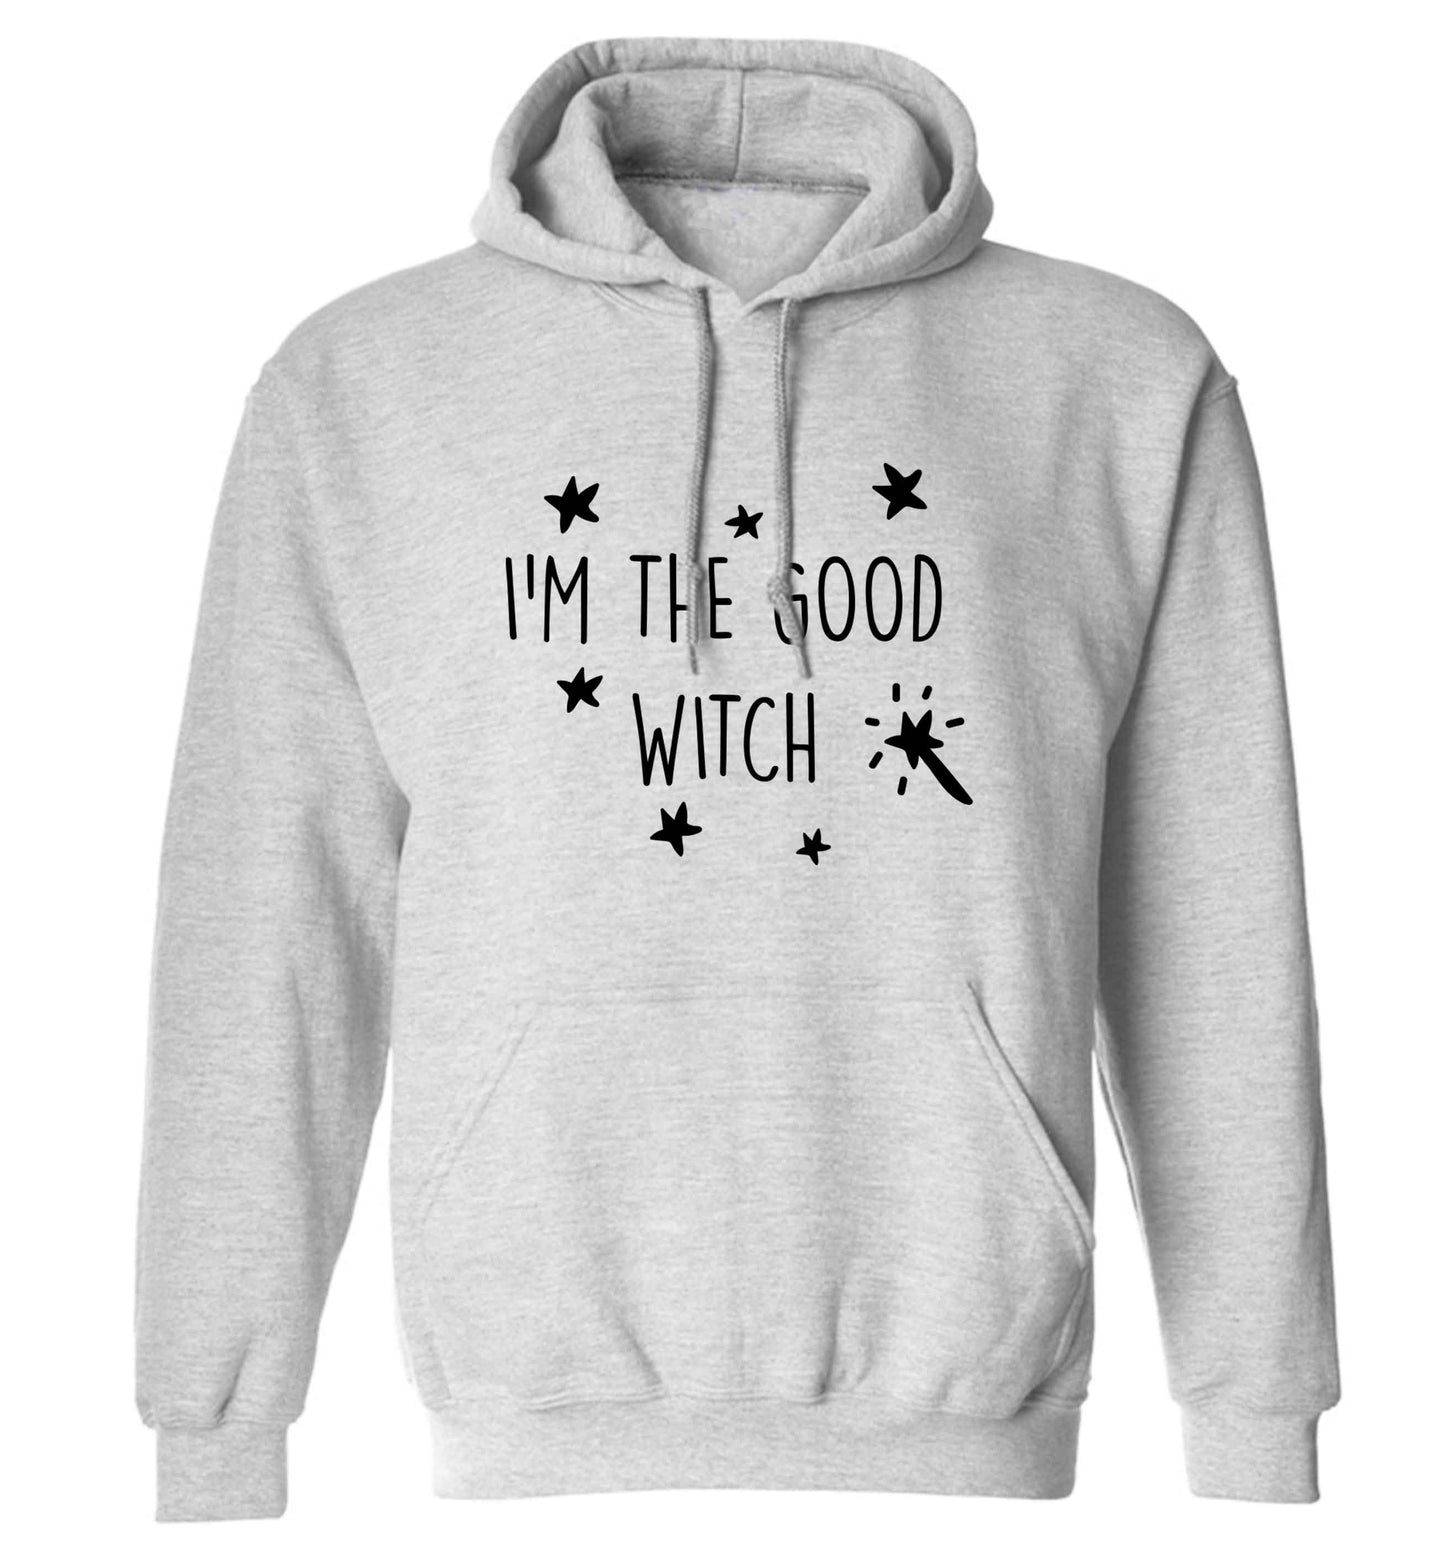 Good witch adults unisex grey hoodie 2XL